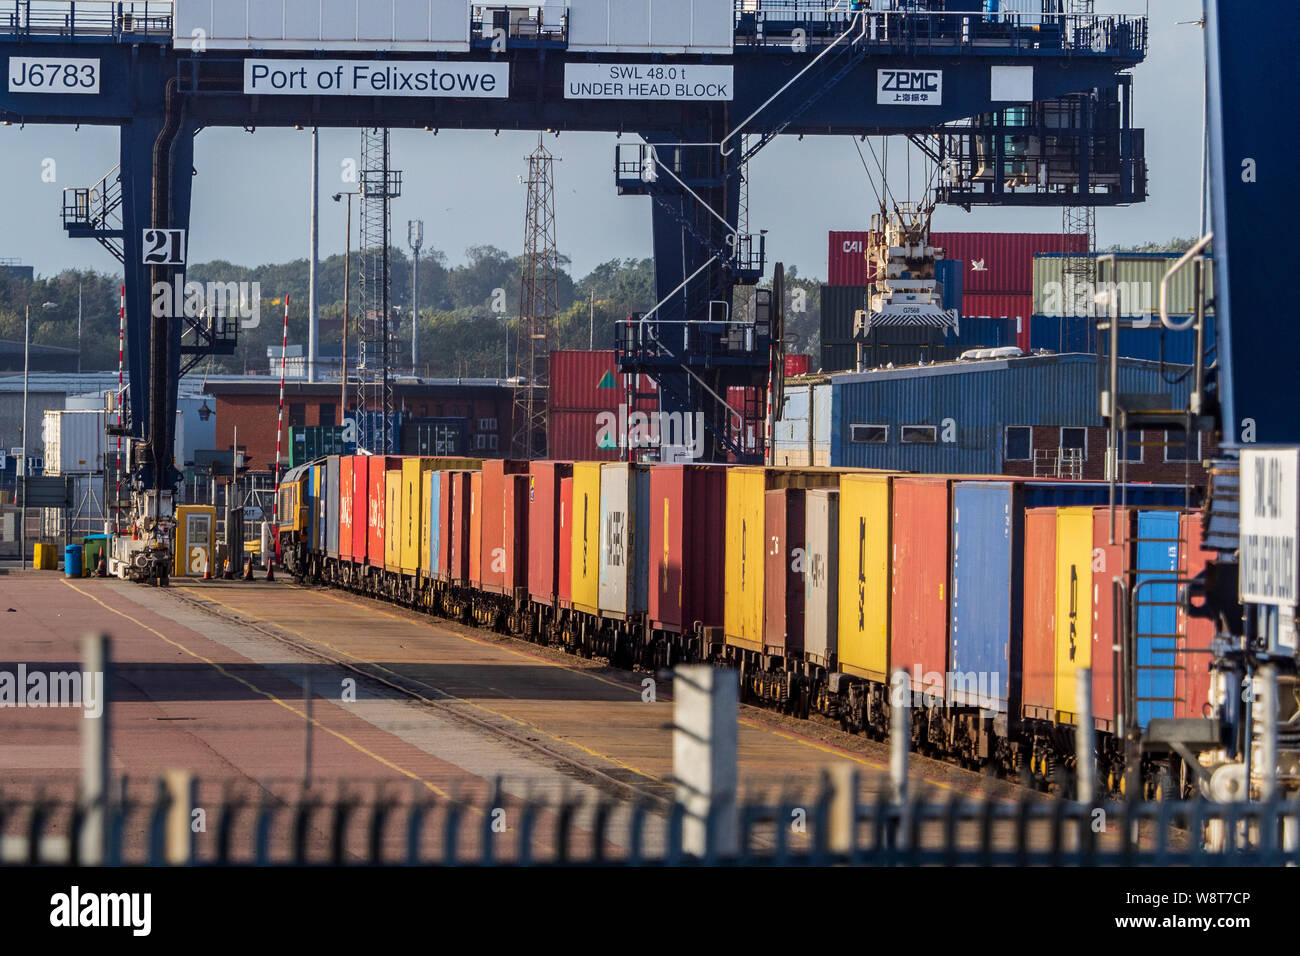 Rail Freight Terminal UK - Intermodal Containers being loaded onto freight trains in Felixstowe Port, the UK's largest container port. Stock Photo